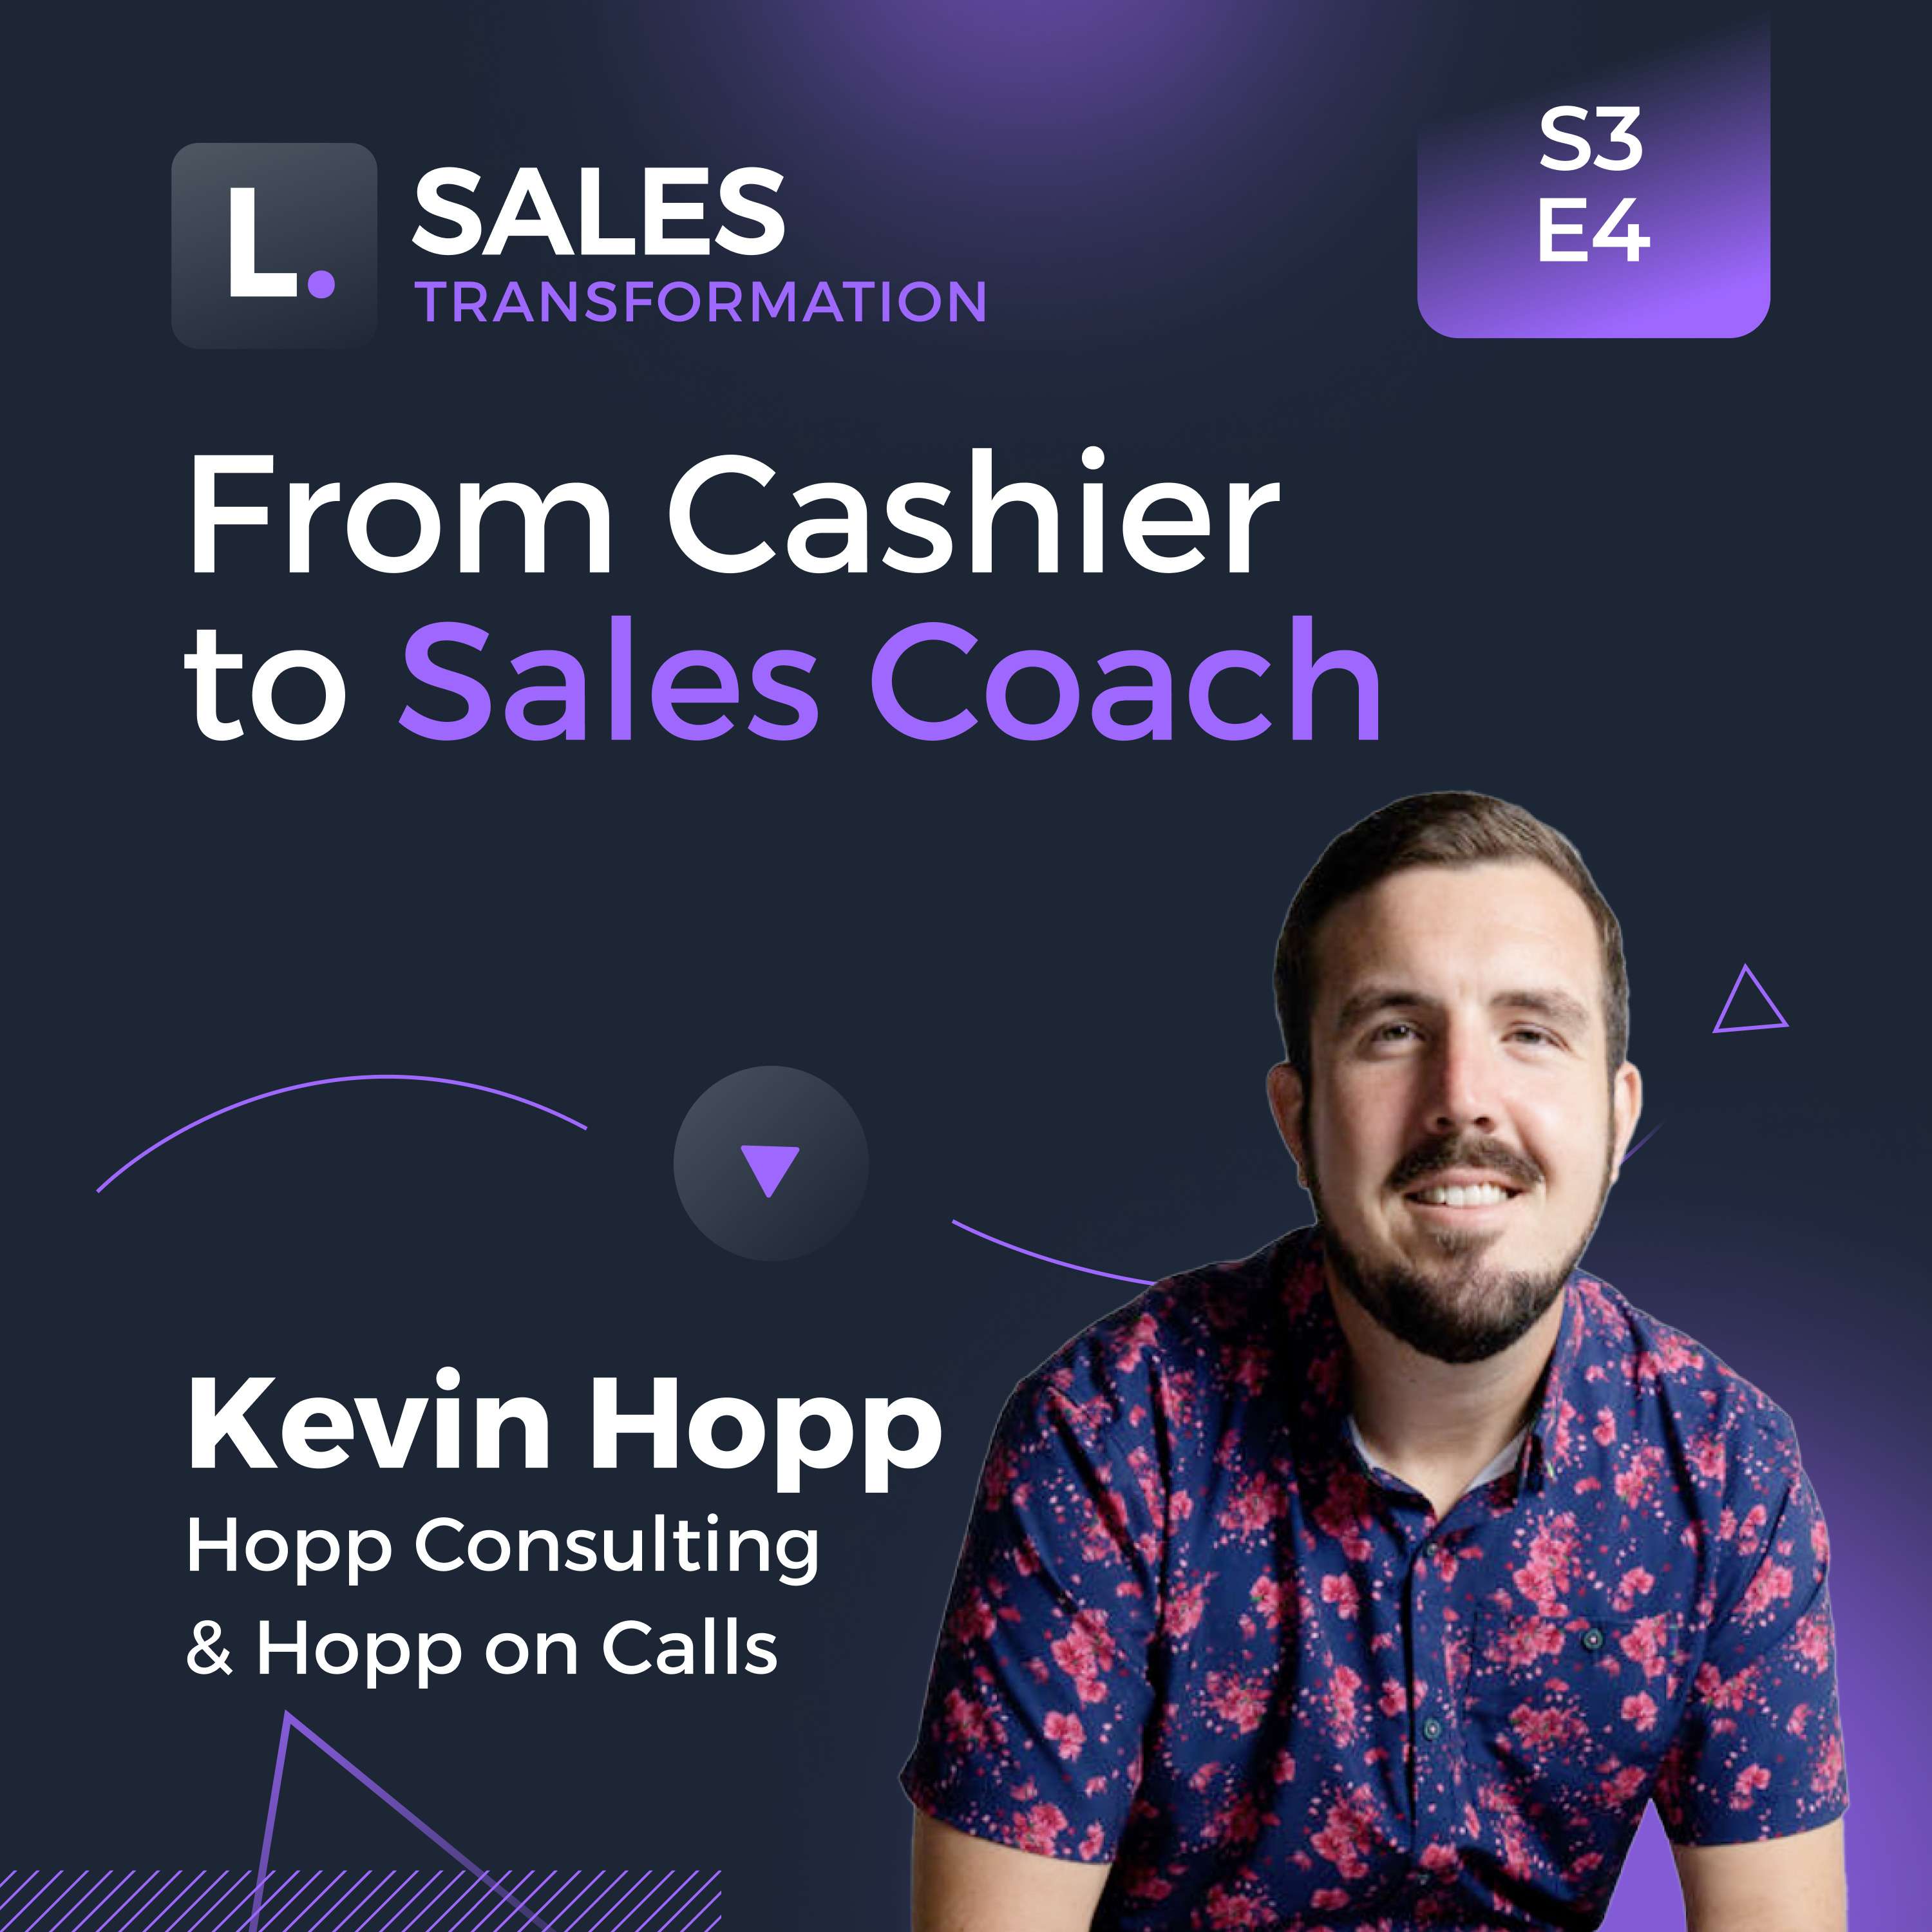 #679 - From Cashier to Sales Coach, with Kevin Hopp